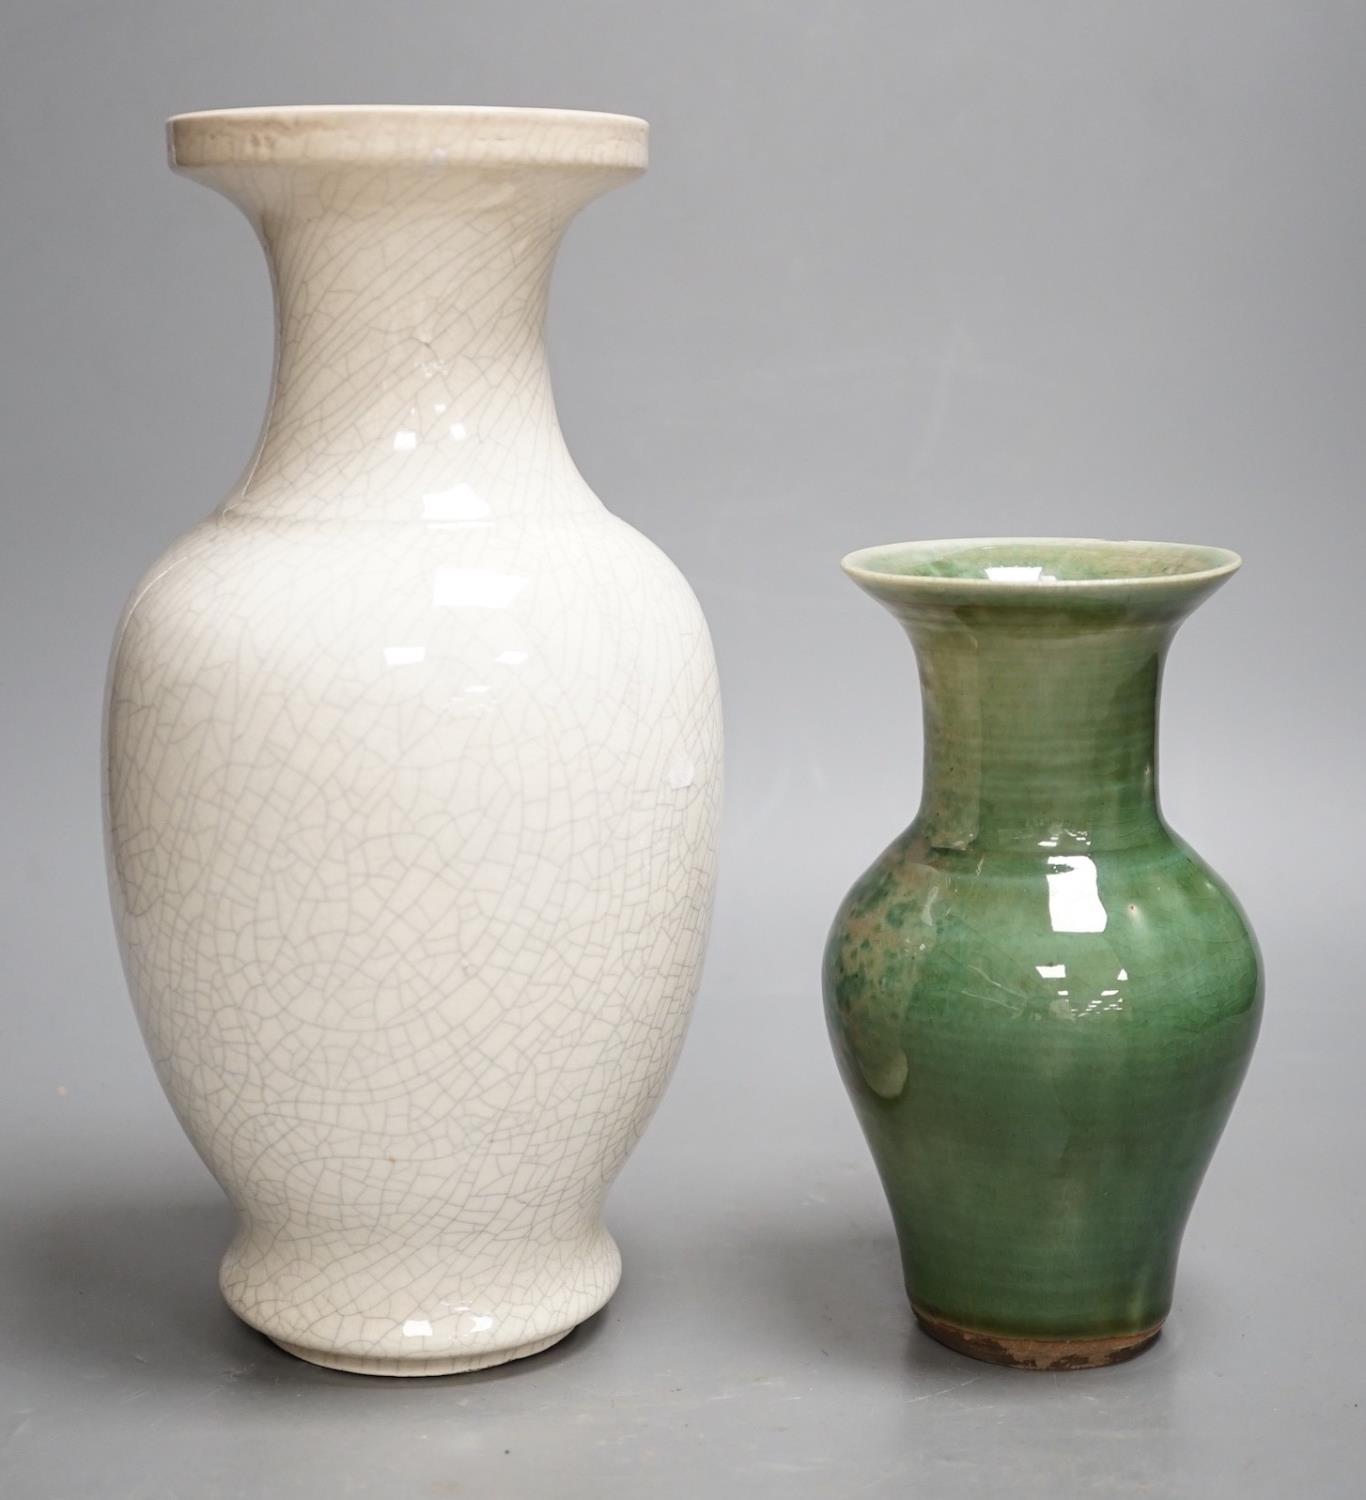 A Chinese white crackleware vase and a smaller green glazed vase,